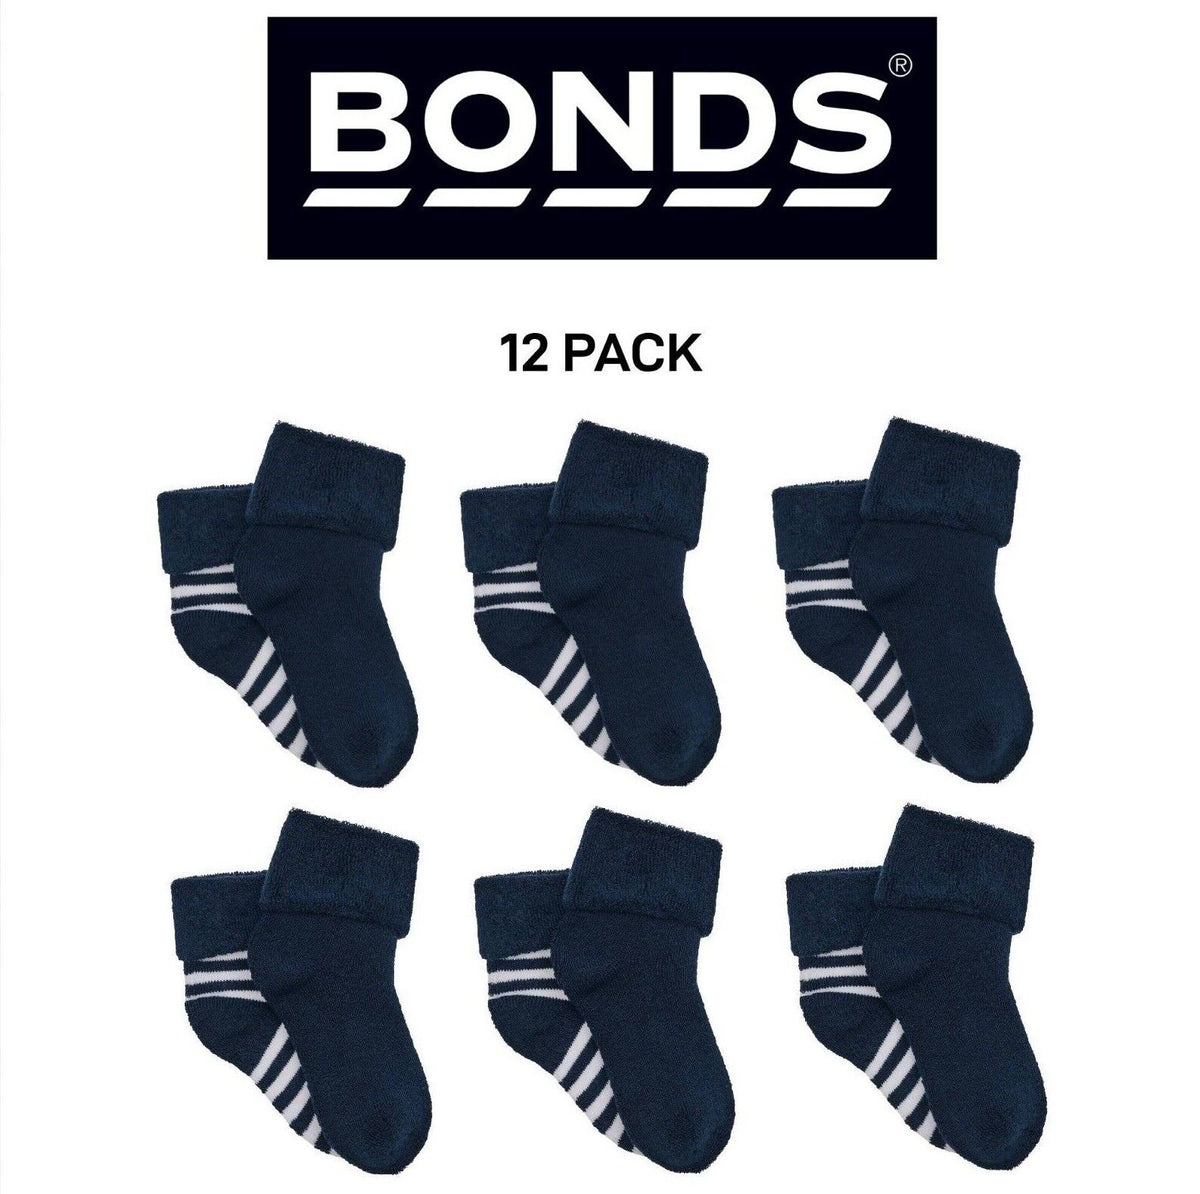 Bonds Baby Wondersock Super Soft Cotton and Durable Comfy 12 Pack R6289T